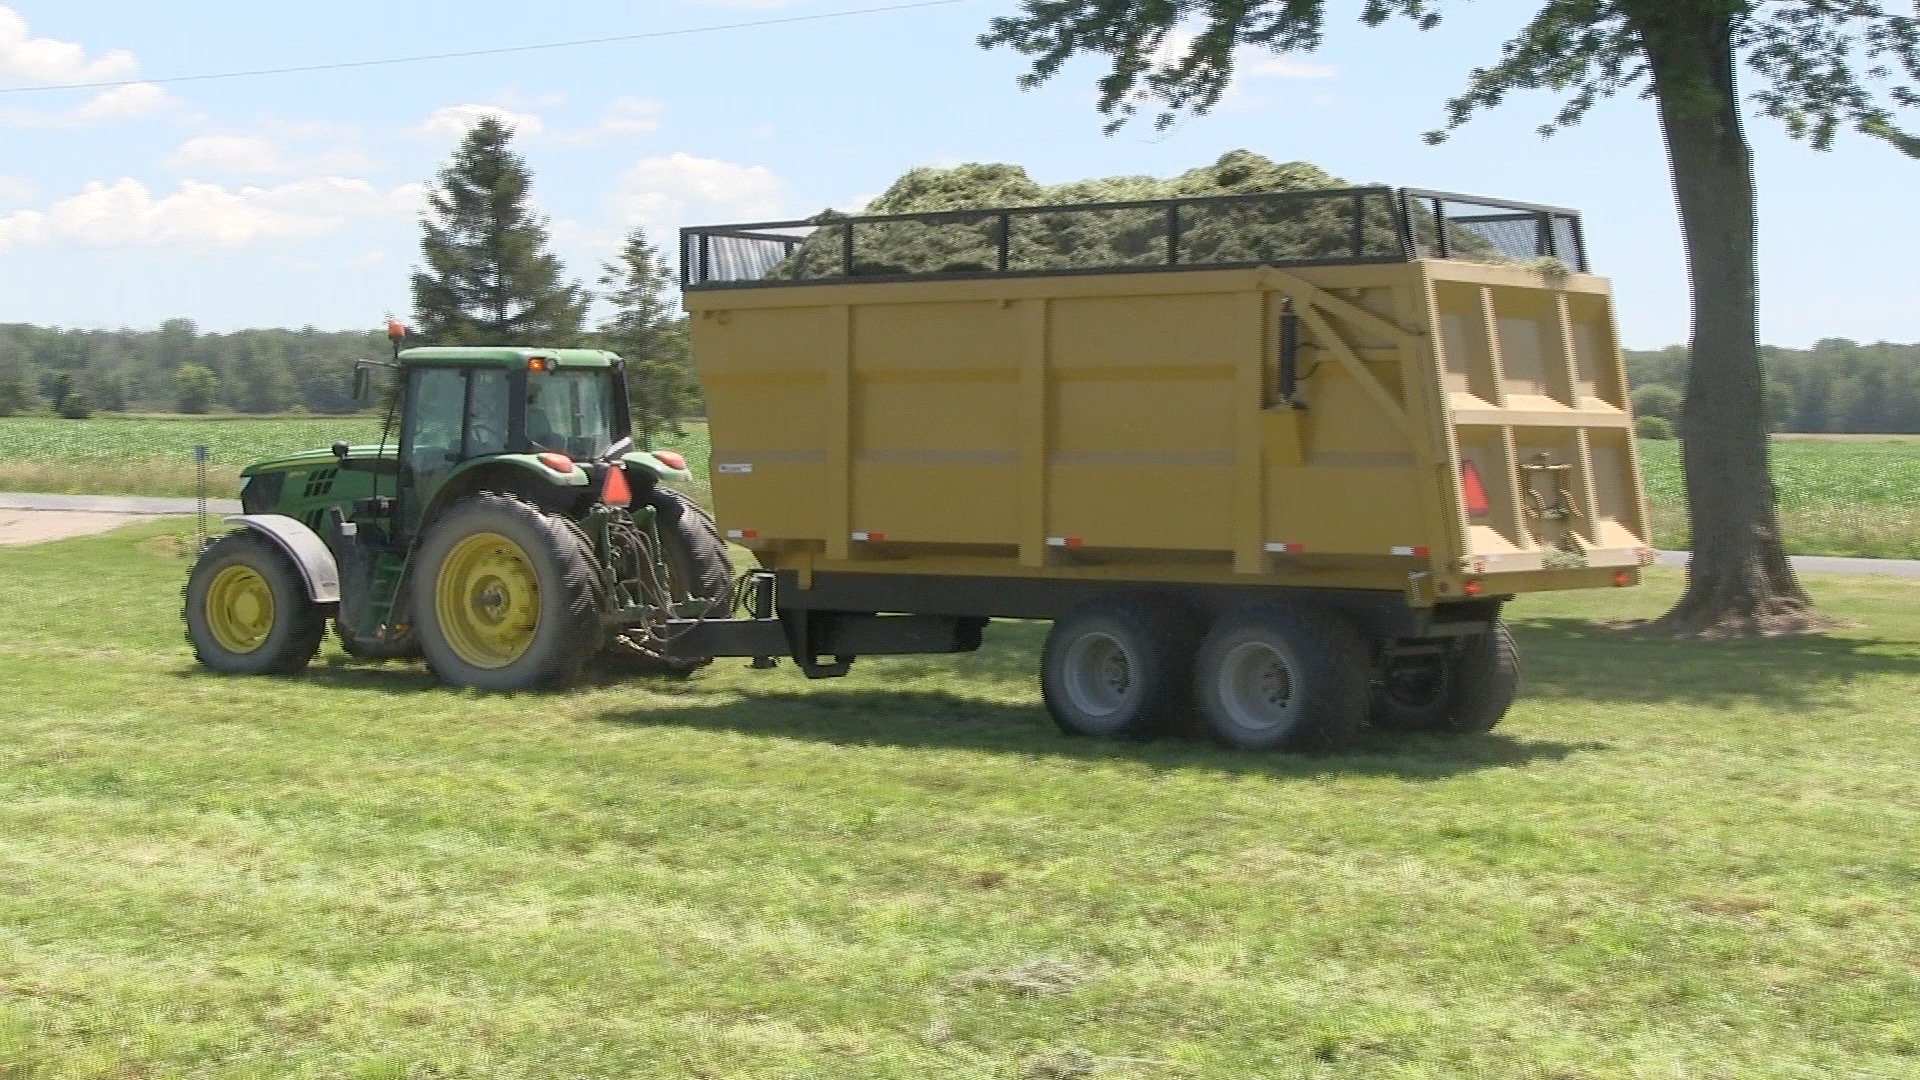 A side shot of the 20 ton dumper trailer getting hay silage loaded into it